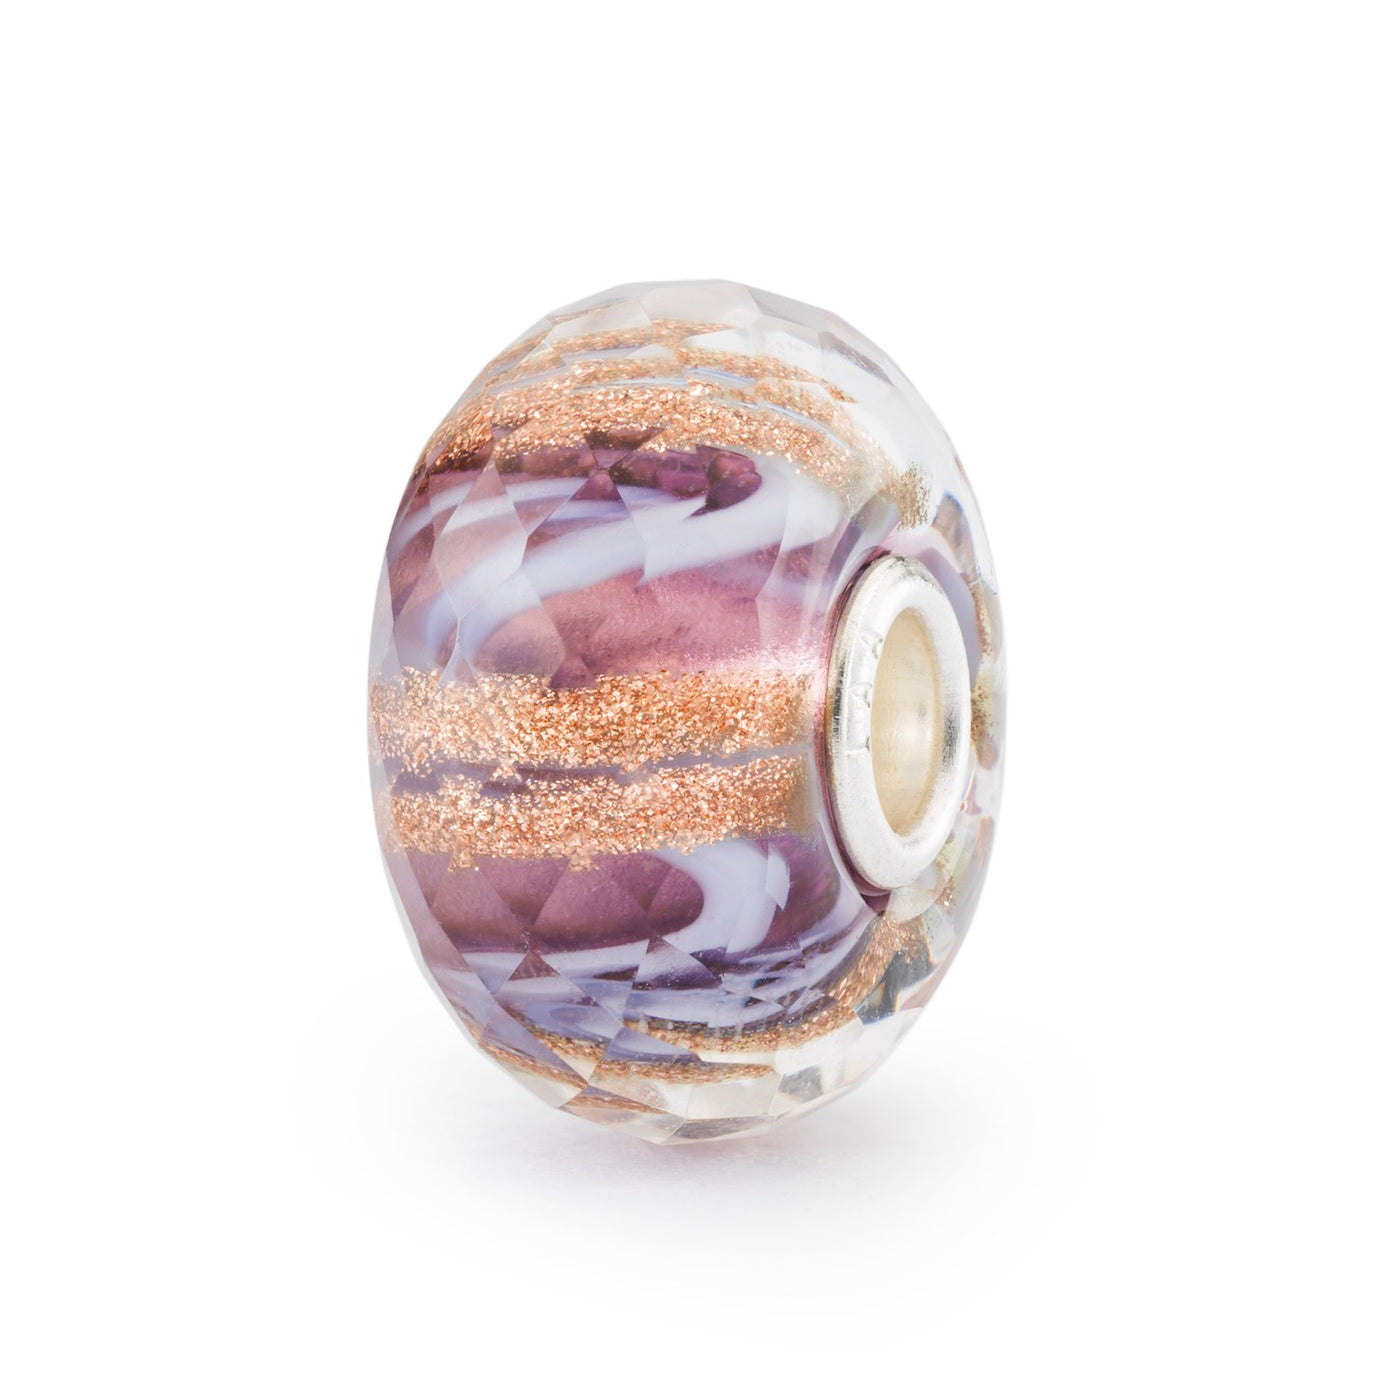 A gorgeous faceted glass bead with a deep violet hue and gold glimmer patterns.